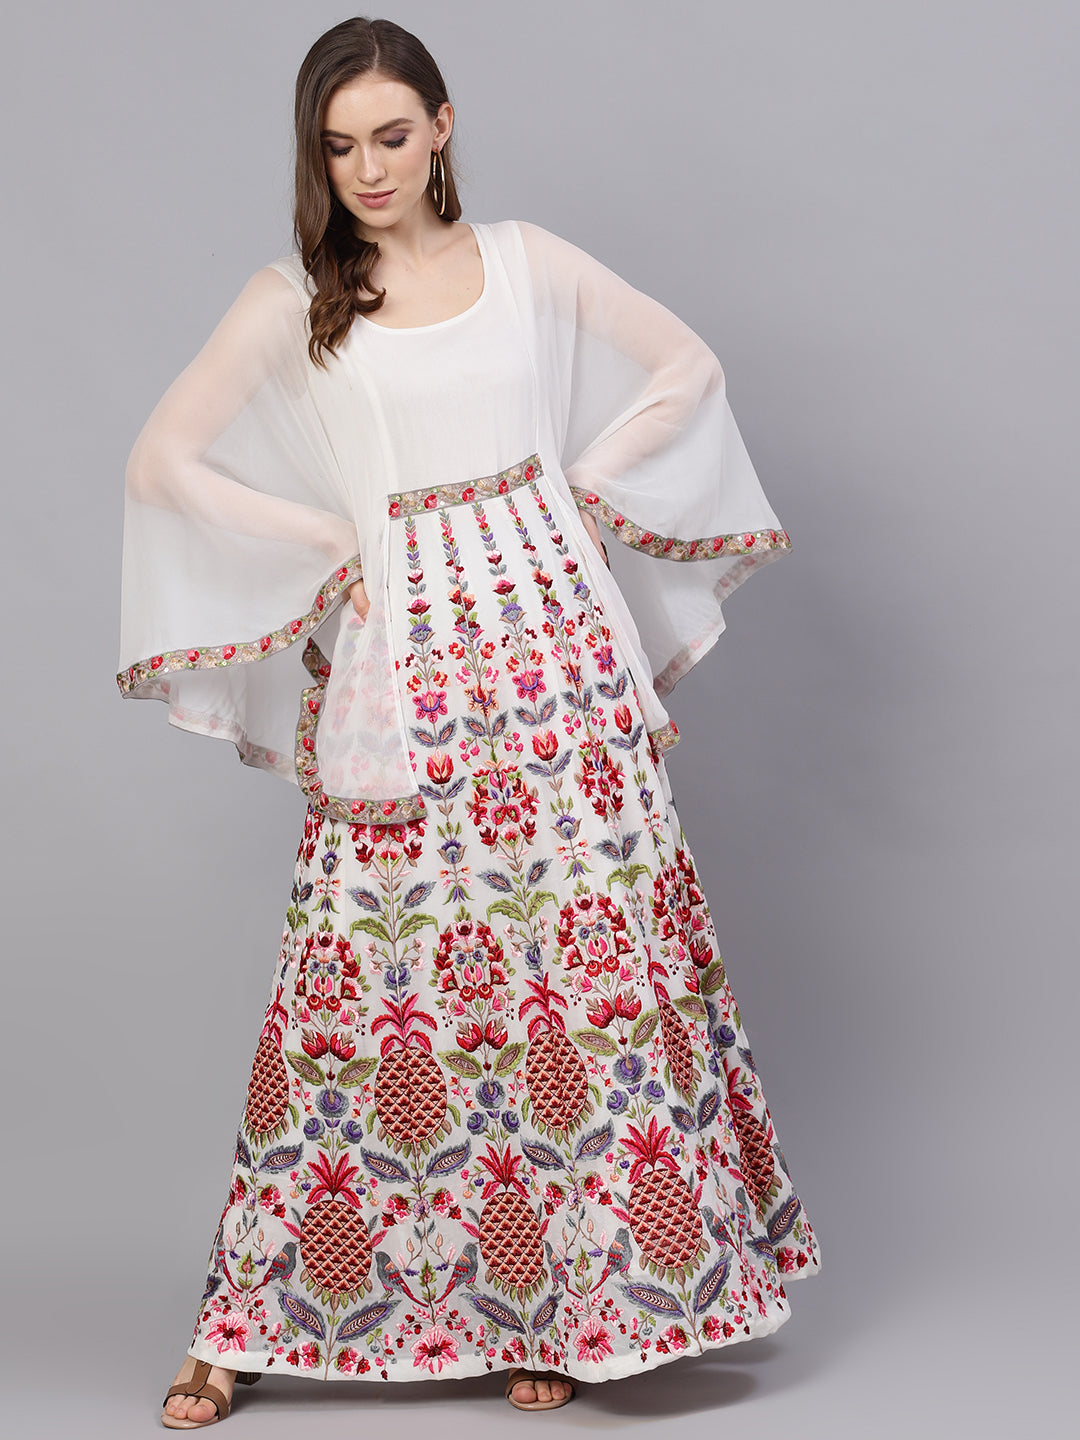 Women's White Embroidered Maxi Dress With Cape Sleeves - Aks